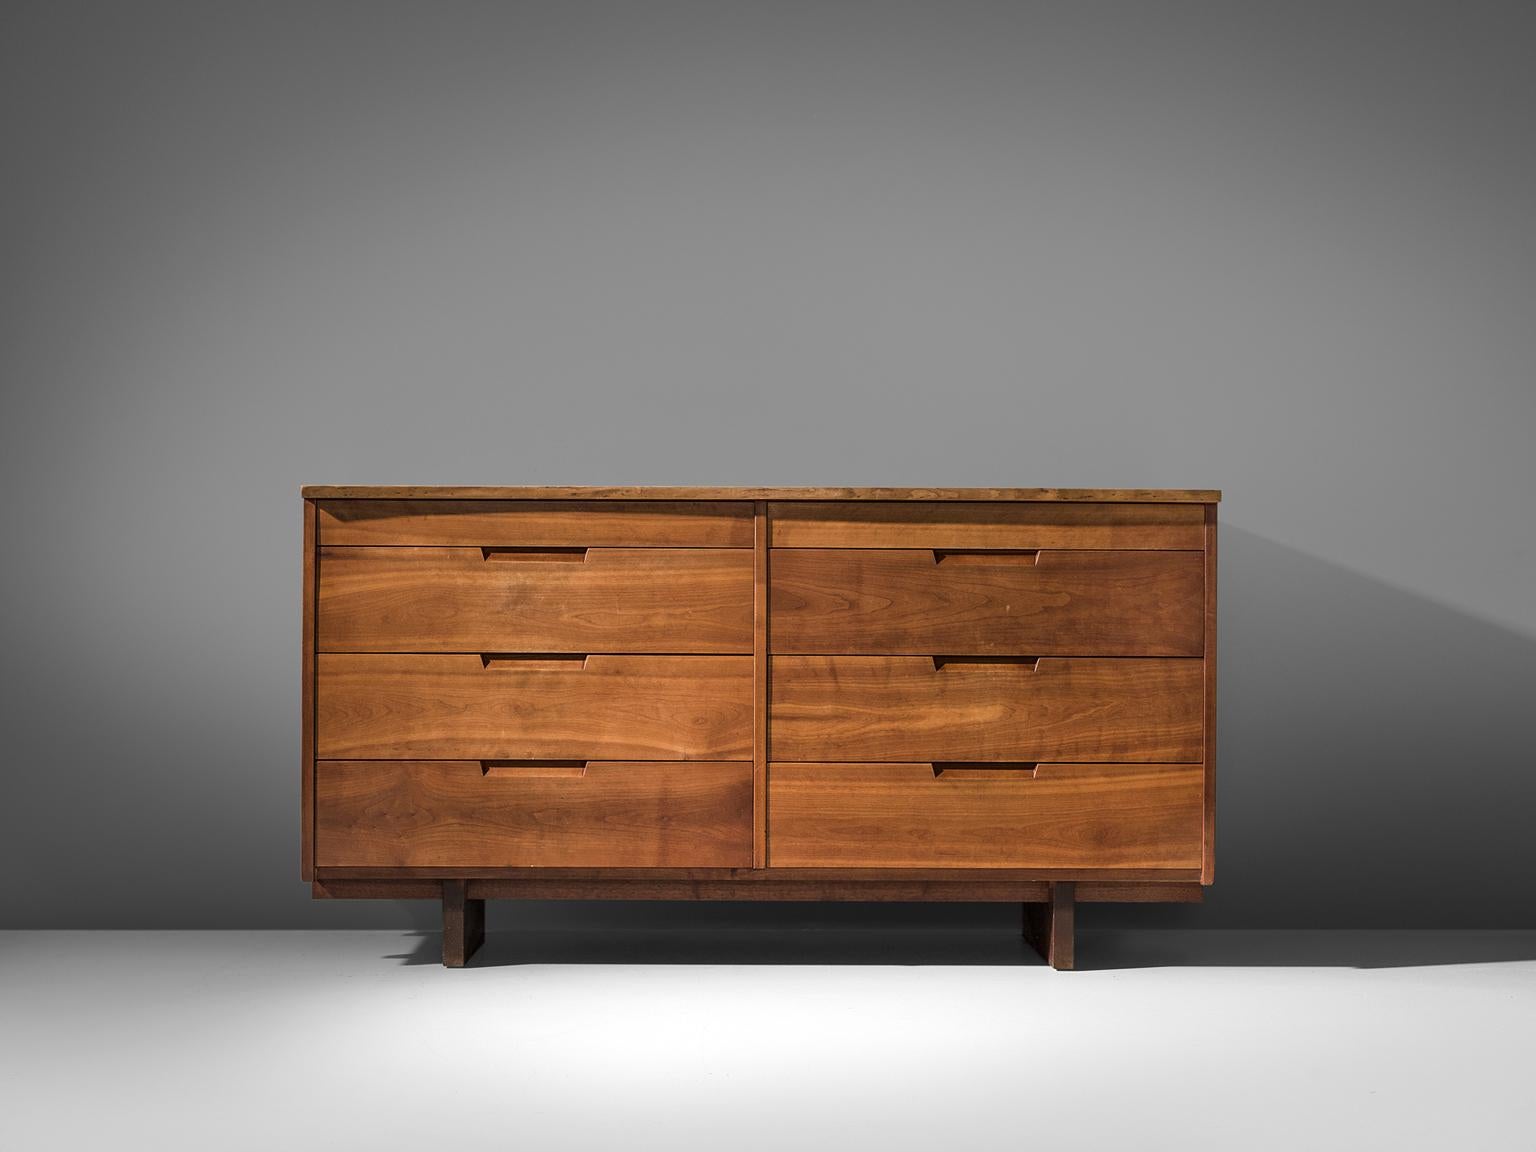 George Nakashima, cabinet in walnut, New Hope, PA, 1960s-1970s.

This cabinet features eight drawers, executed in walnut with traditional and finished with archetypical dovetail Nakashima wood-joints. The cabinet rests on two slabs of solid walnut